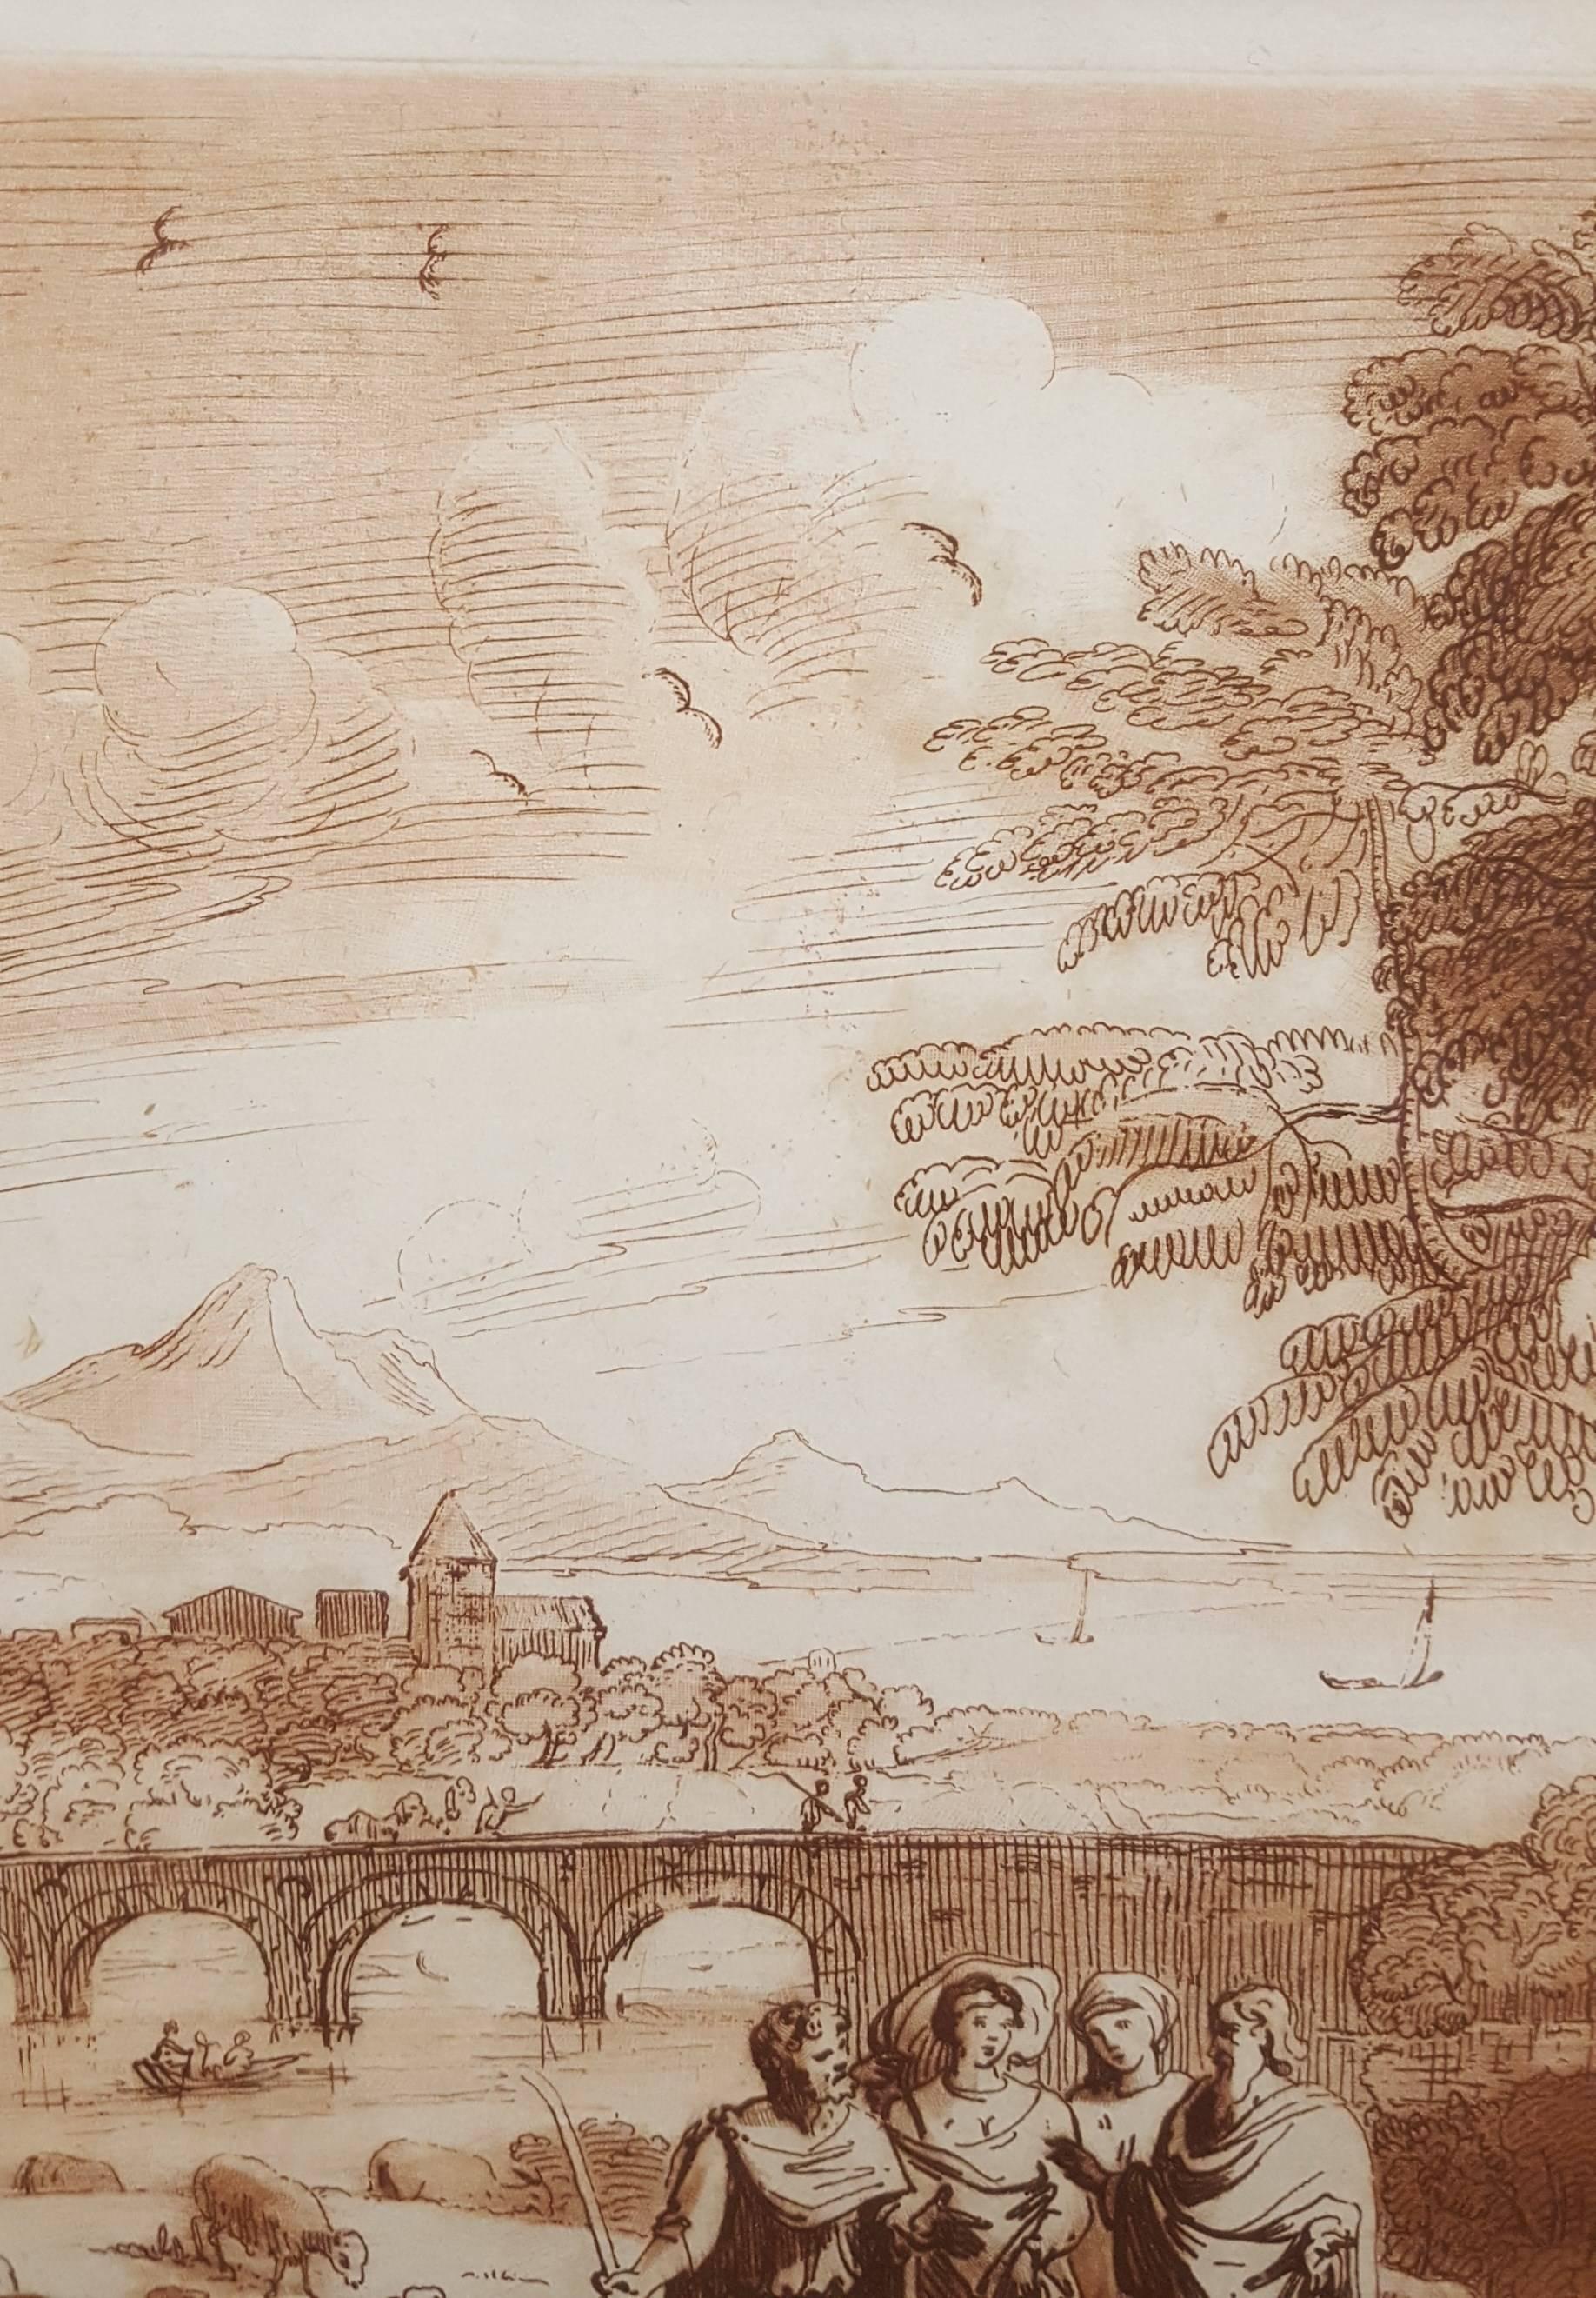 An original engraving with mezzotint after French artist Claude Lorrain's drawing (1604-1682) by English artist Richard Earlom (1743-1822). From Richard Earlom's 